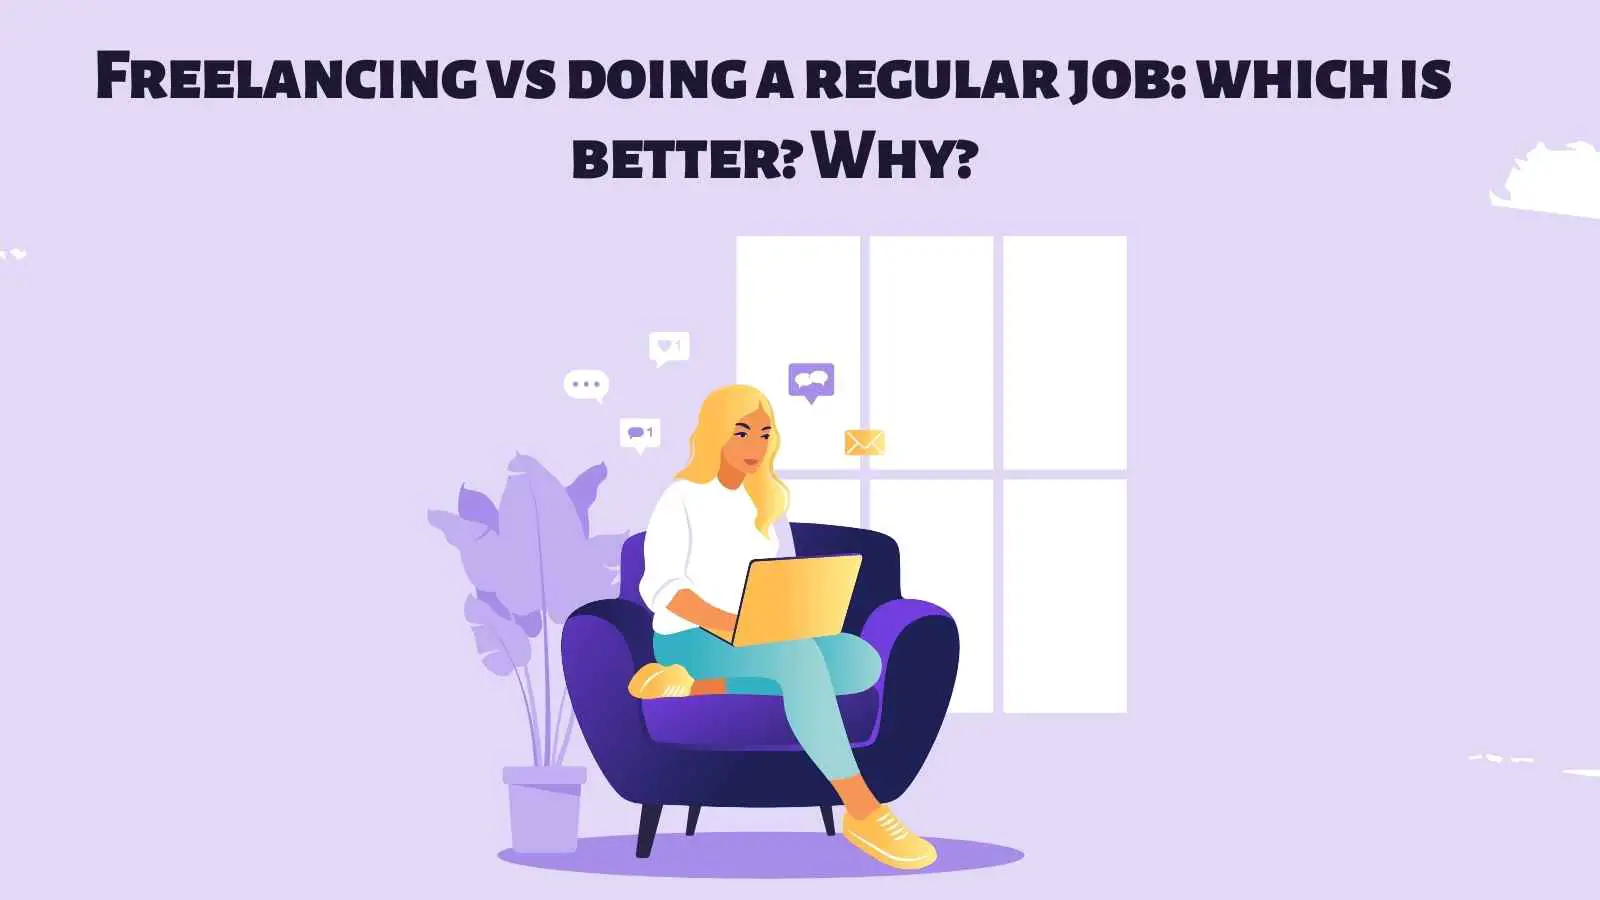 Freelancing vs doing a regular job: which is better? Why?